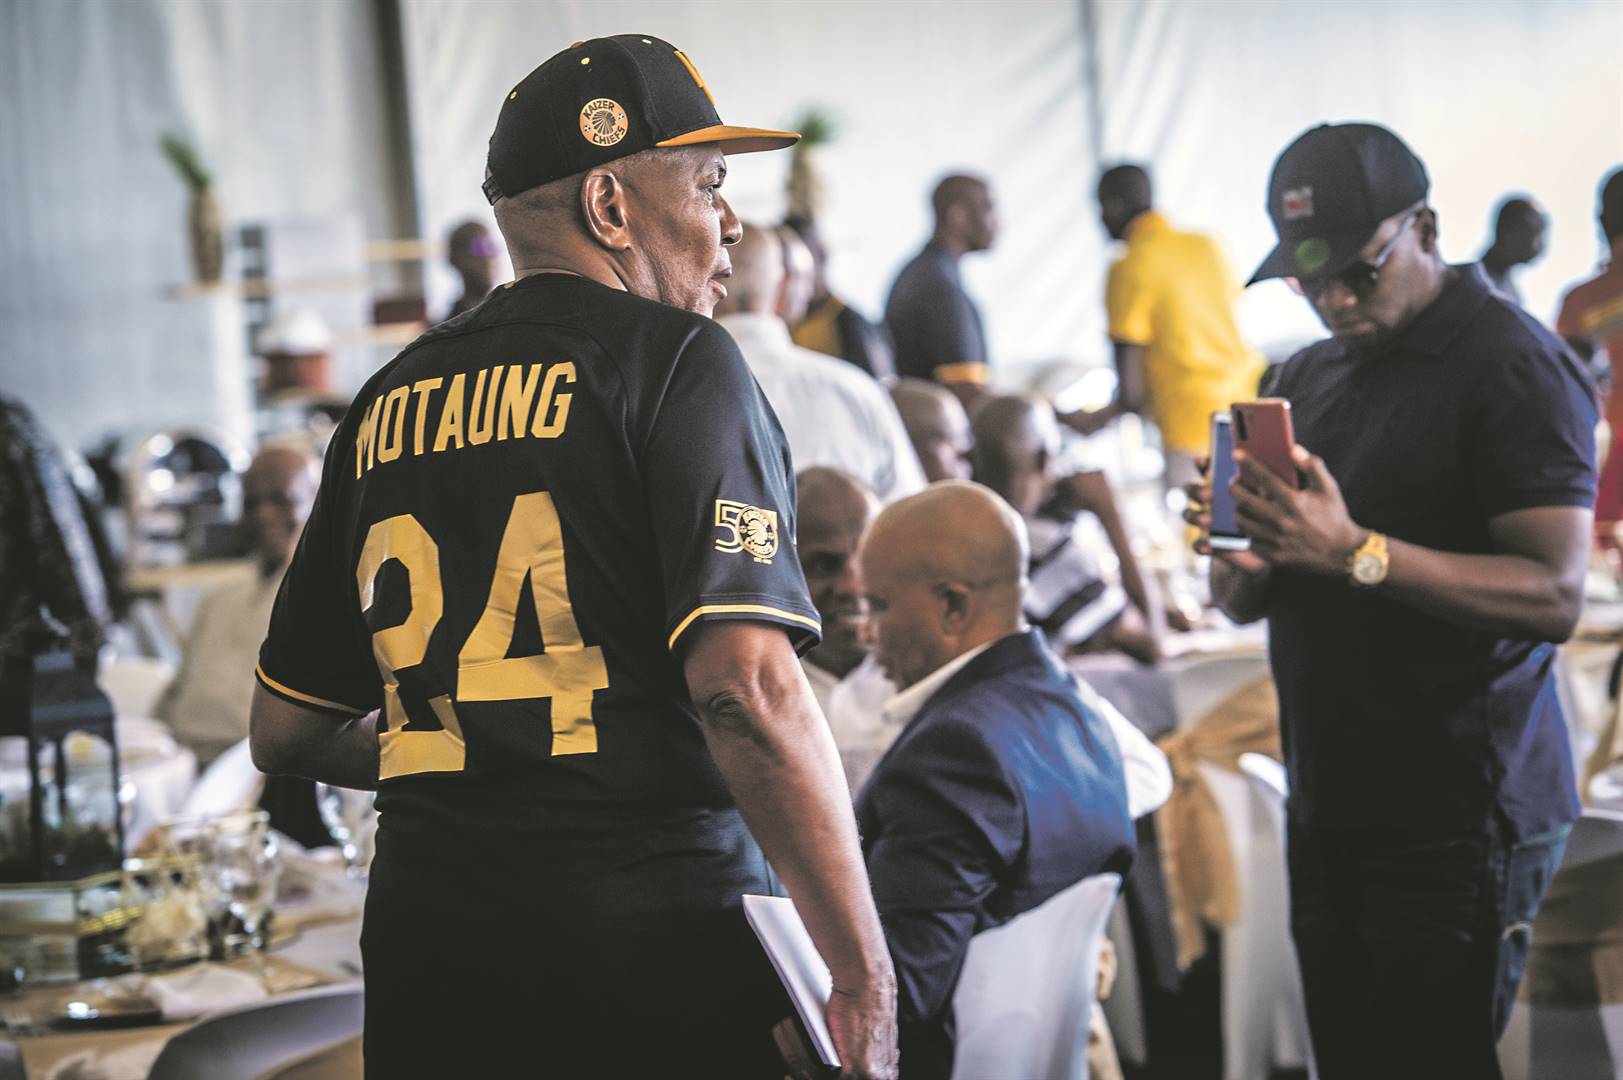 Motaung never wore the revered jersey number 10, choosing a trailblazing number 24 instead. Photo: Tobias Ginsberg